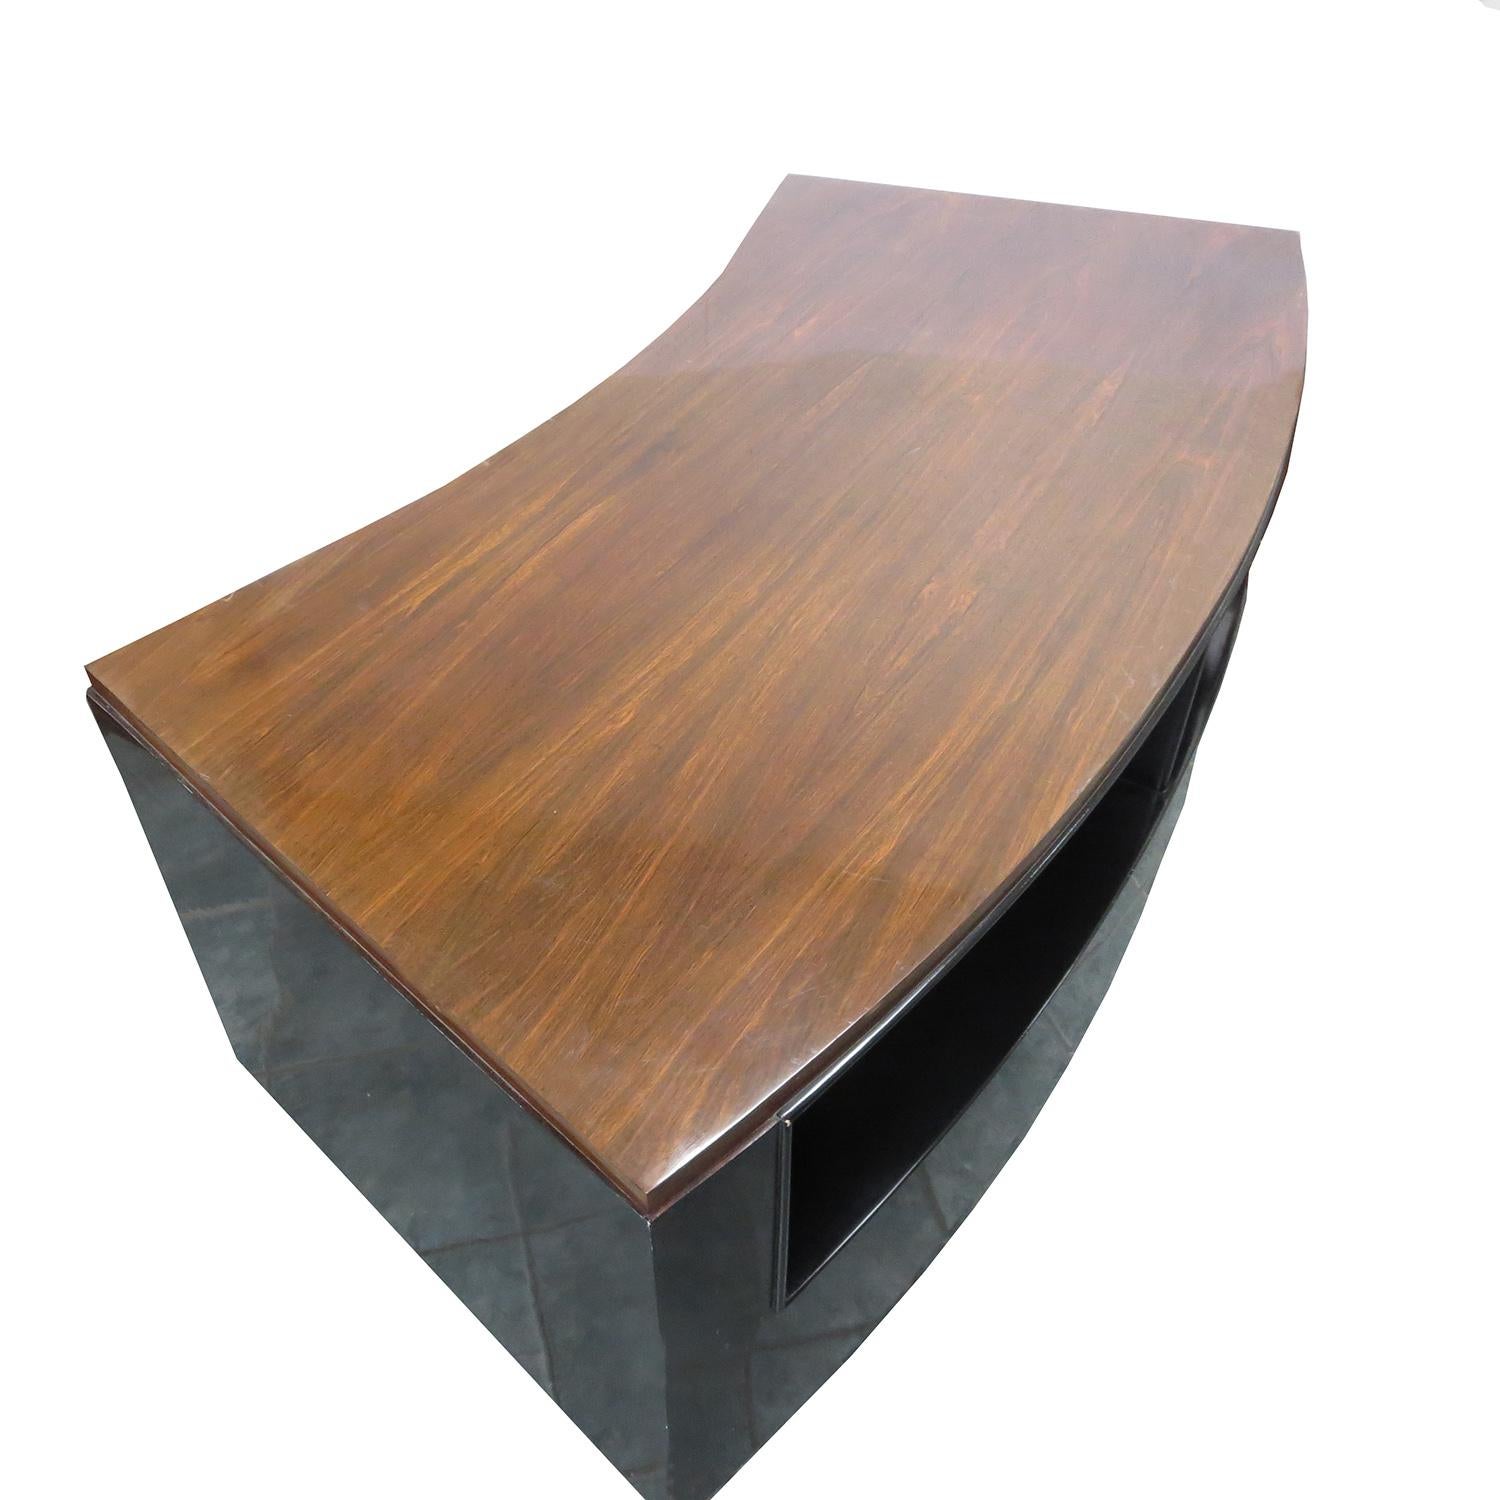 This lovely desk has served us well, but now must be part of our clearance sale! The top surface and drawer faces are a dark walnut, and the body is black lacquered. The desk has a pleasing curved shape, making it wider in the front, and narrower in